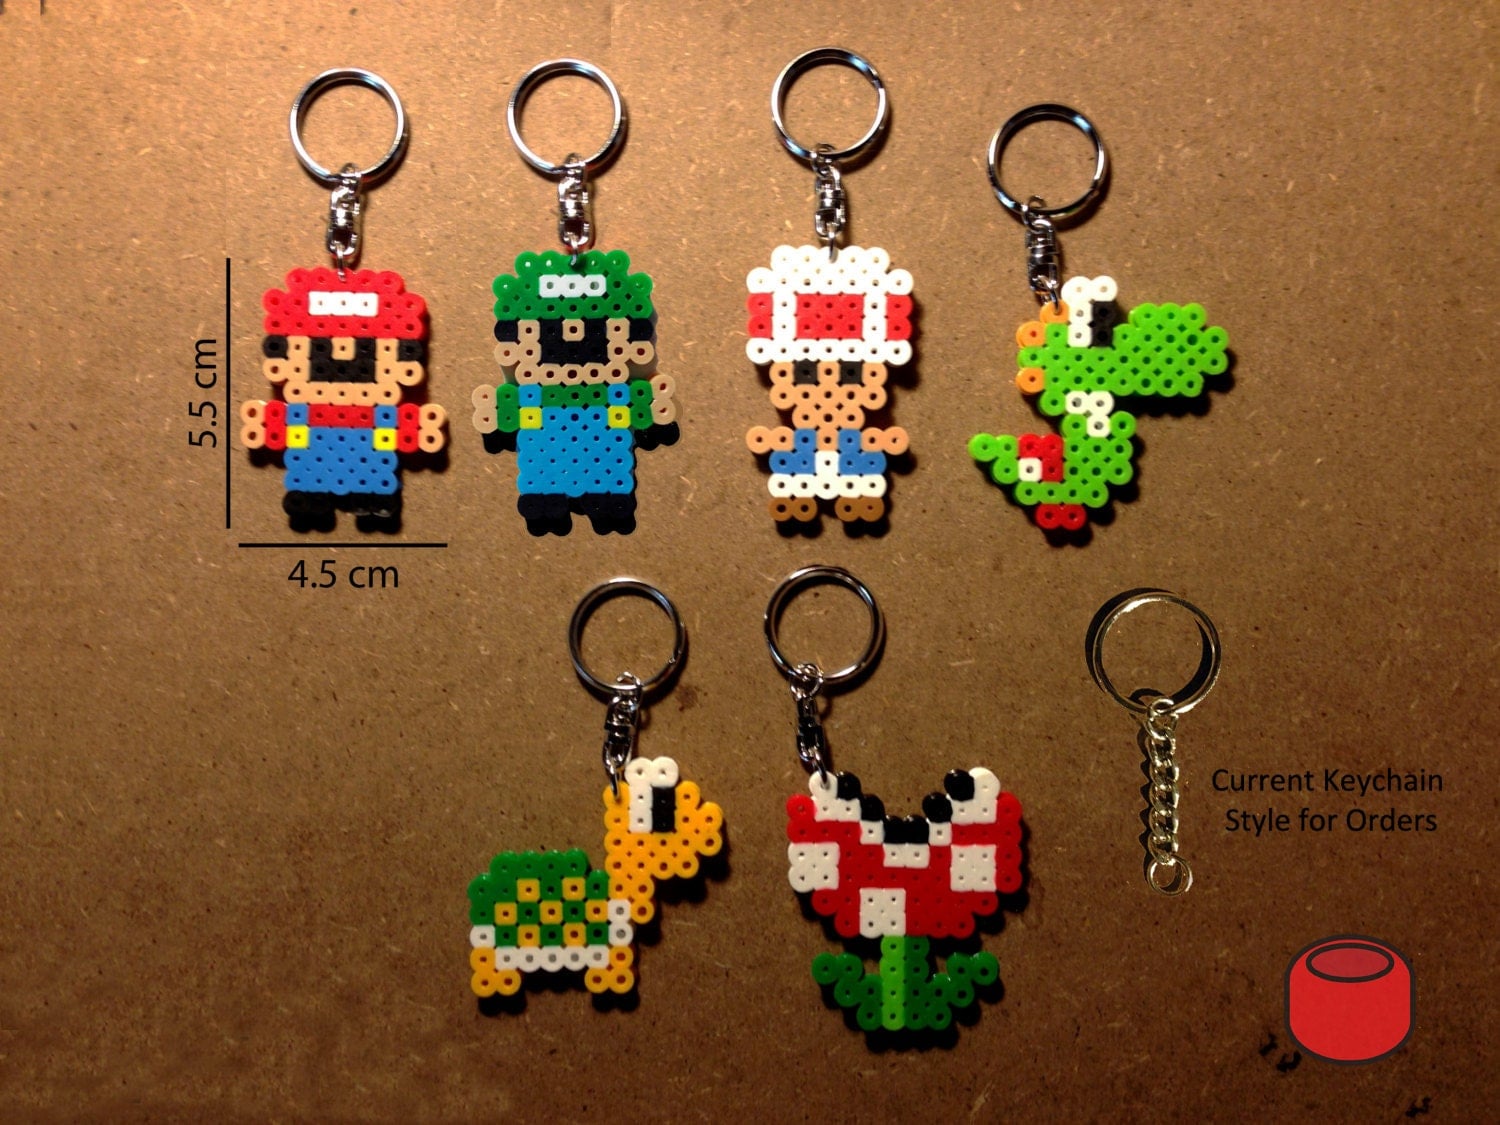 Mario Keychains Magnets and Pins made from Perler Beads by DJbits